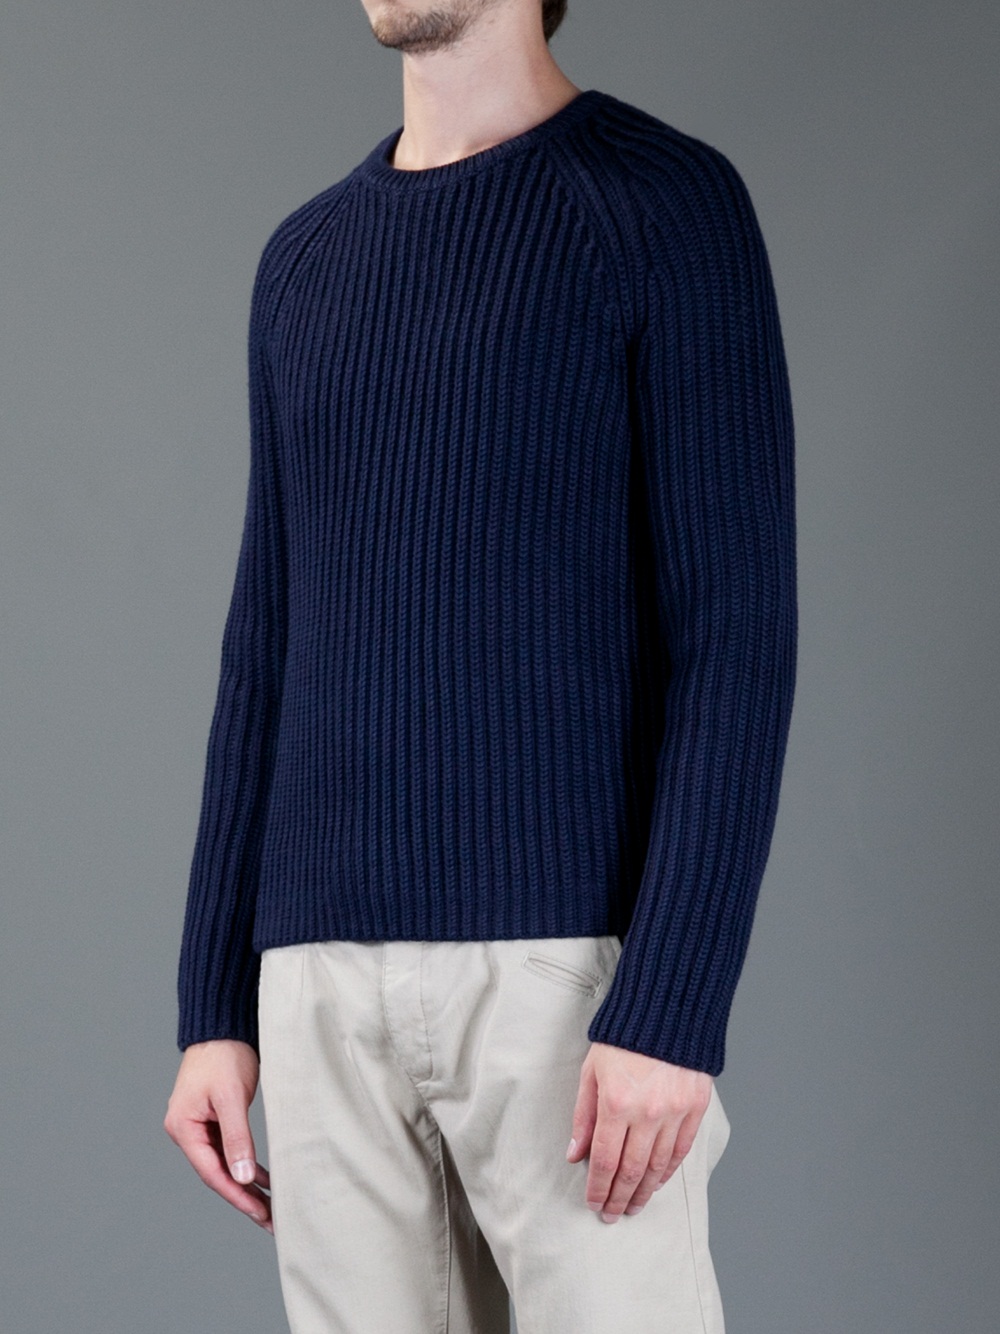 Lyst - Neil Barrett Thick Ribbed Sweater in Blue for Men